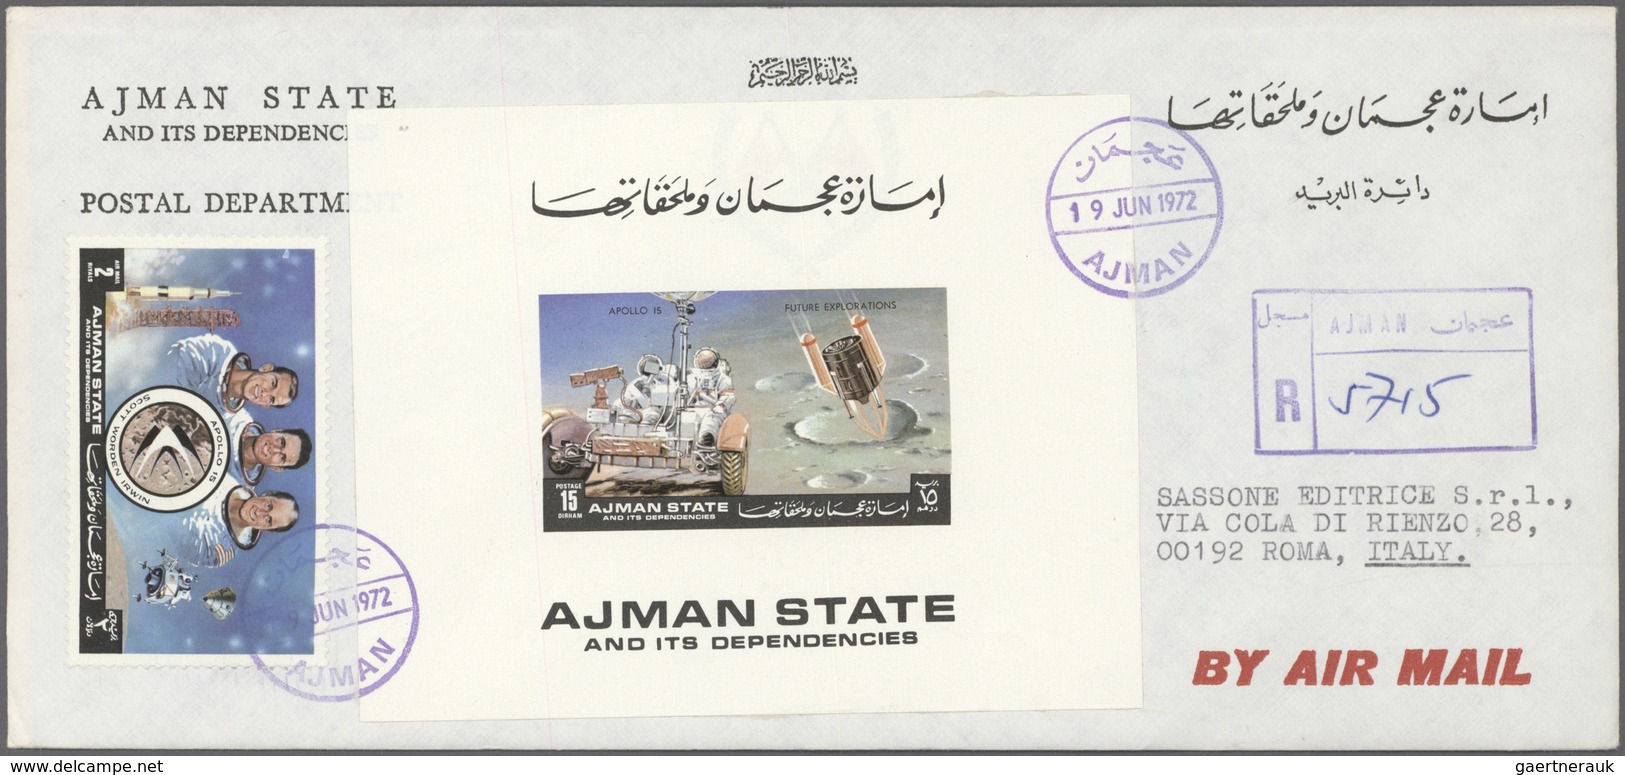 08030 Adschman / Ajman: 1971, Apollo 15, 5dh. to 50dh., six de luxe sheets each on registered airmail cove